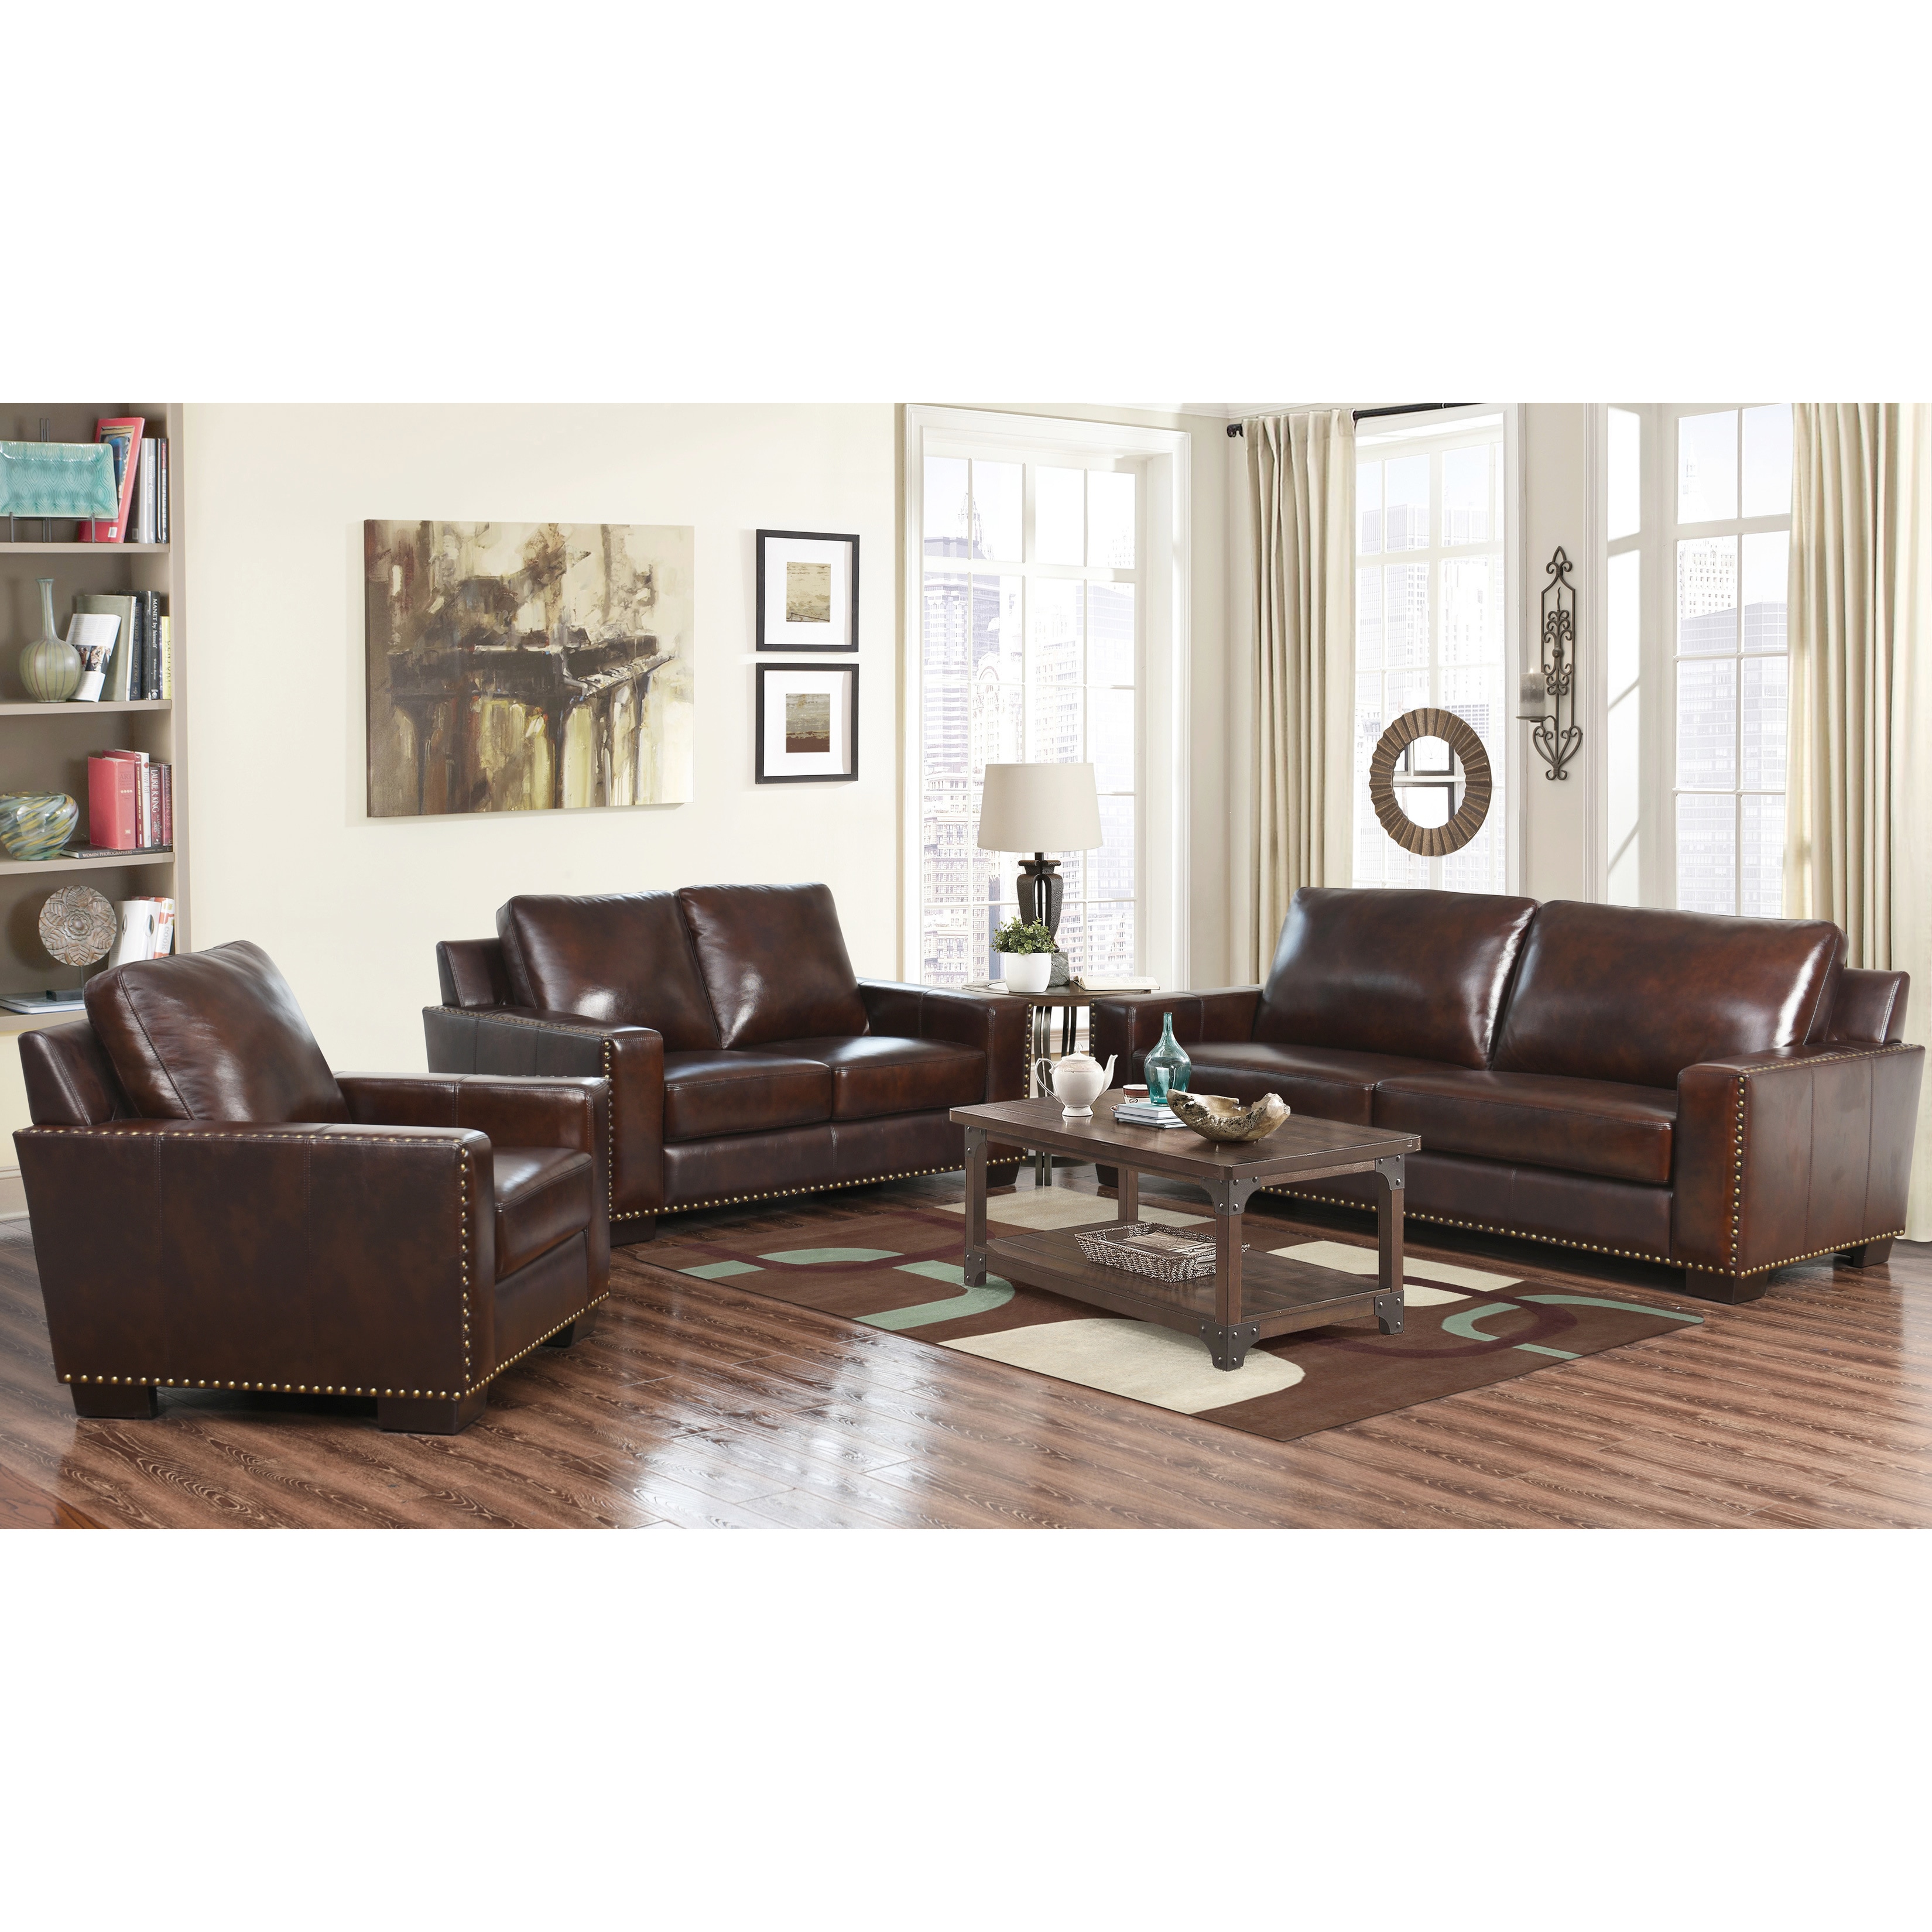 Abbyson Living Barrington 3 Piece Hand Rubbed Leather Sofa Loveseat And Armchair (Espresso brownLeather match used on sides and backKiln Dried hardwood framesHigh resiliency 2.2  density foam cushioning for added comfort and supportHand stitched detailsBr